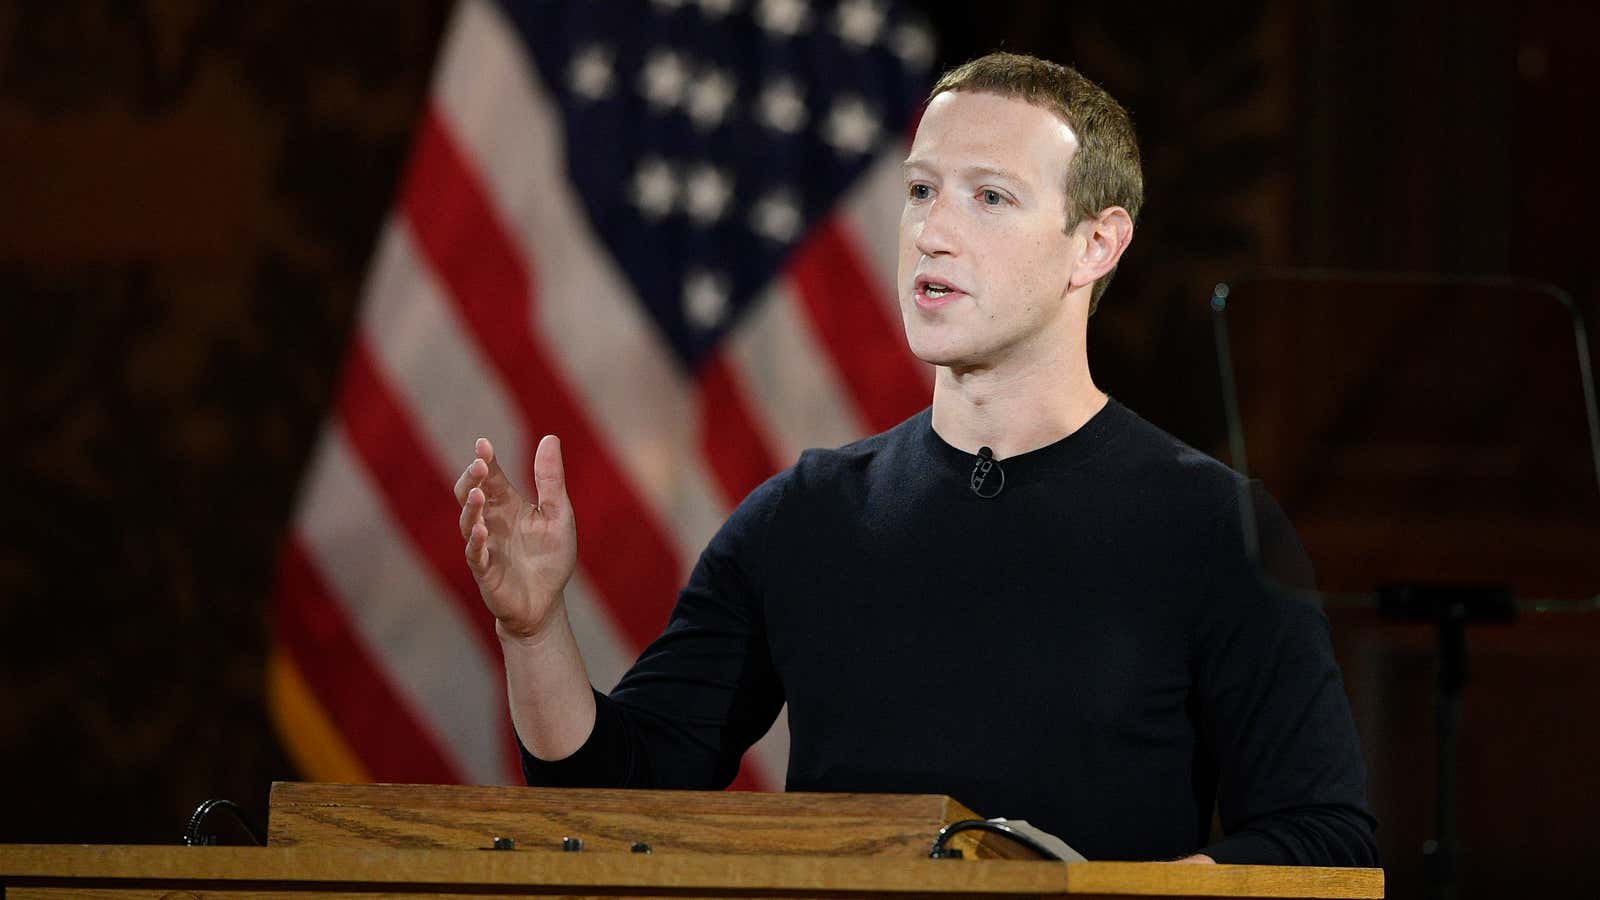 Mark Zuckerberg’s Facebook has floated changes for political ads.